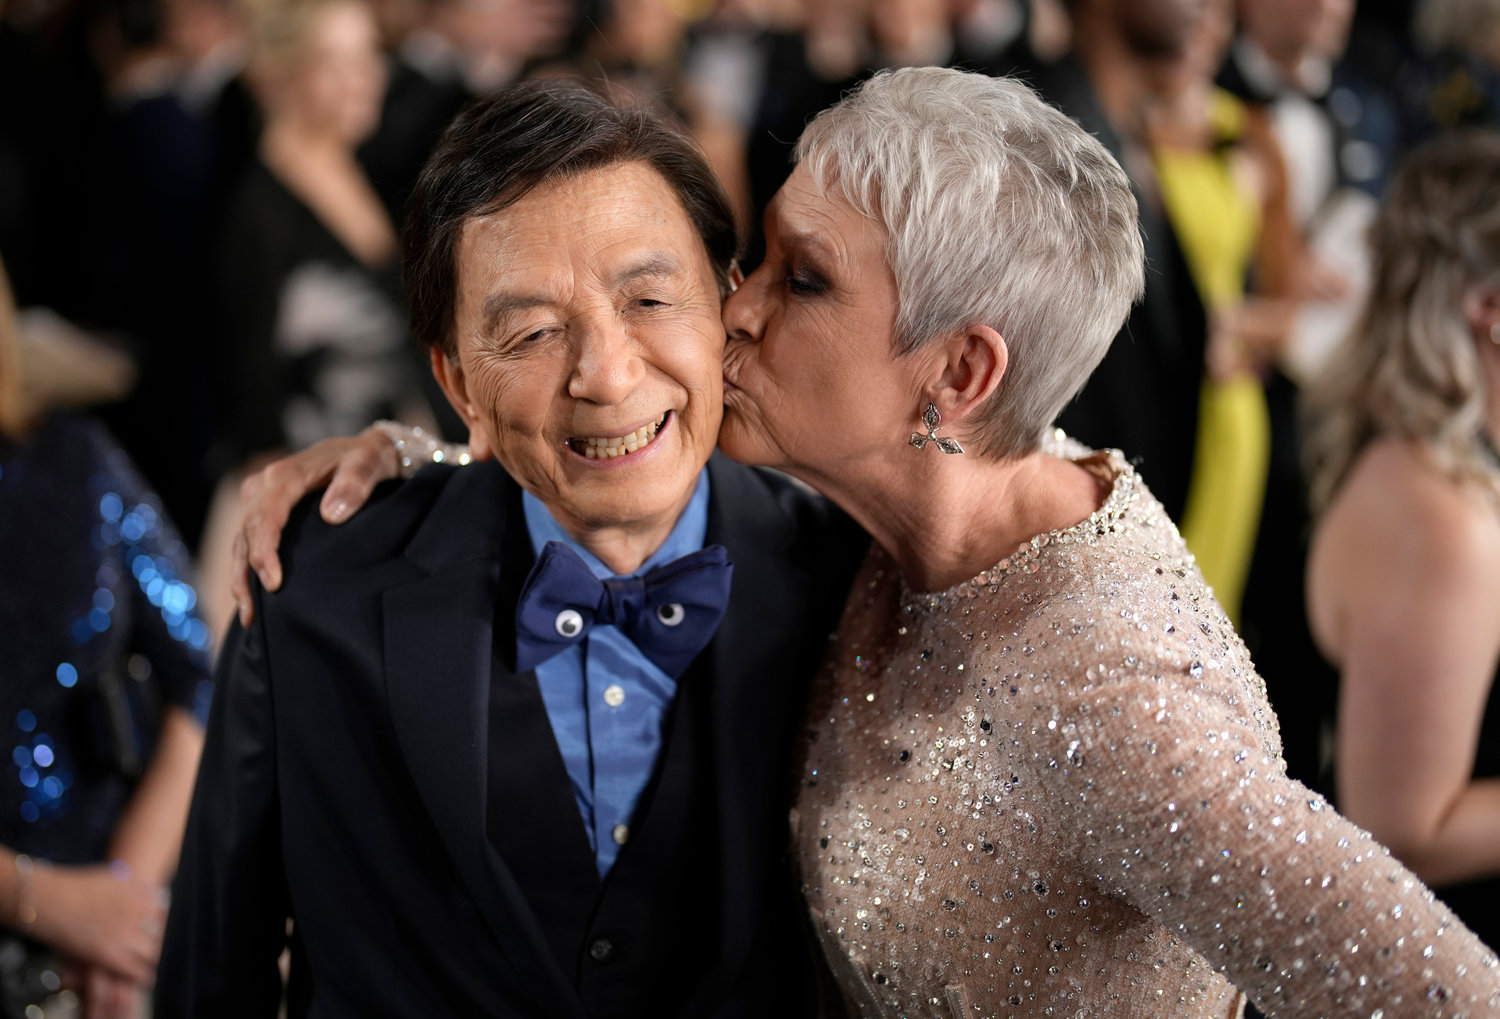 James Hong, left, and Jamie Lee Curtis arrive at the Oscars on Sunday, March 12, 2023, at the Dolby Theatre in Los Angeles. (AP Photo/John Locher)